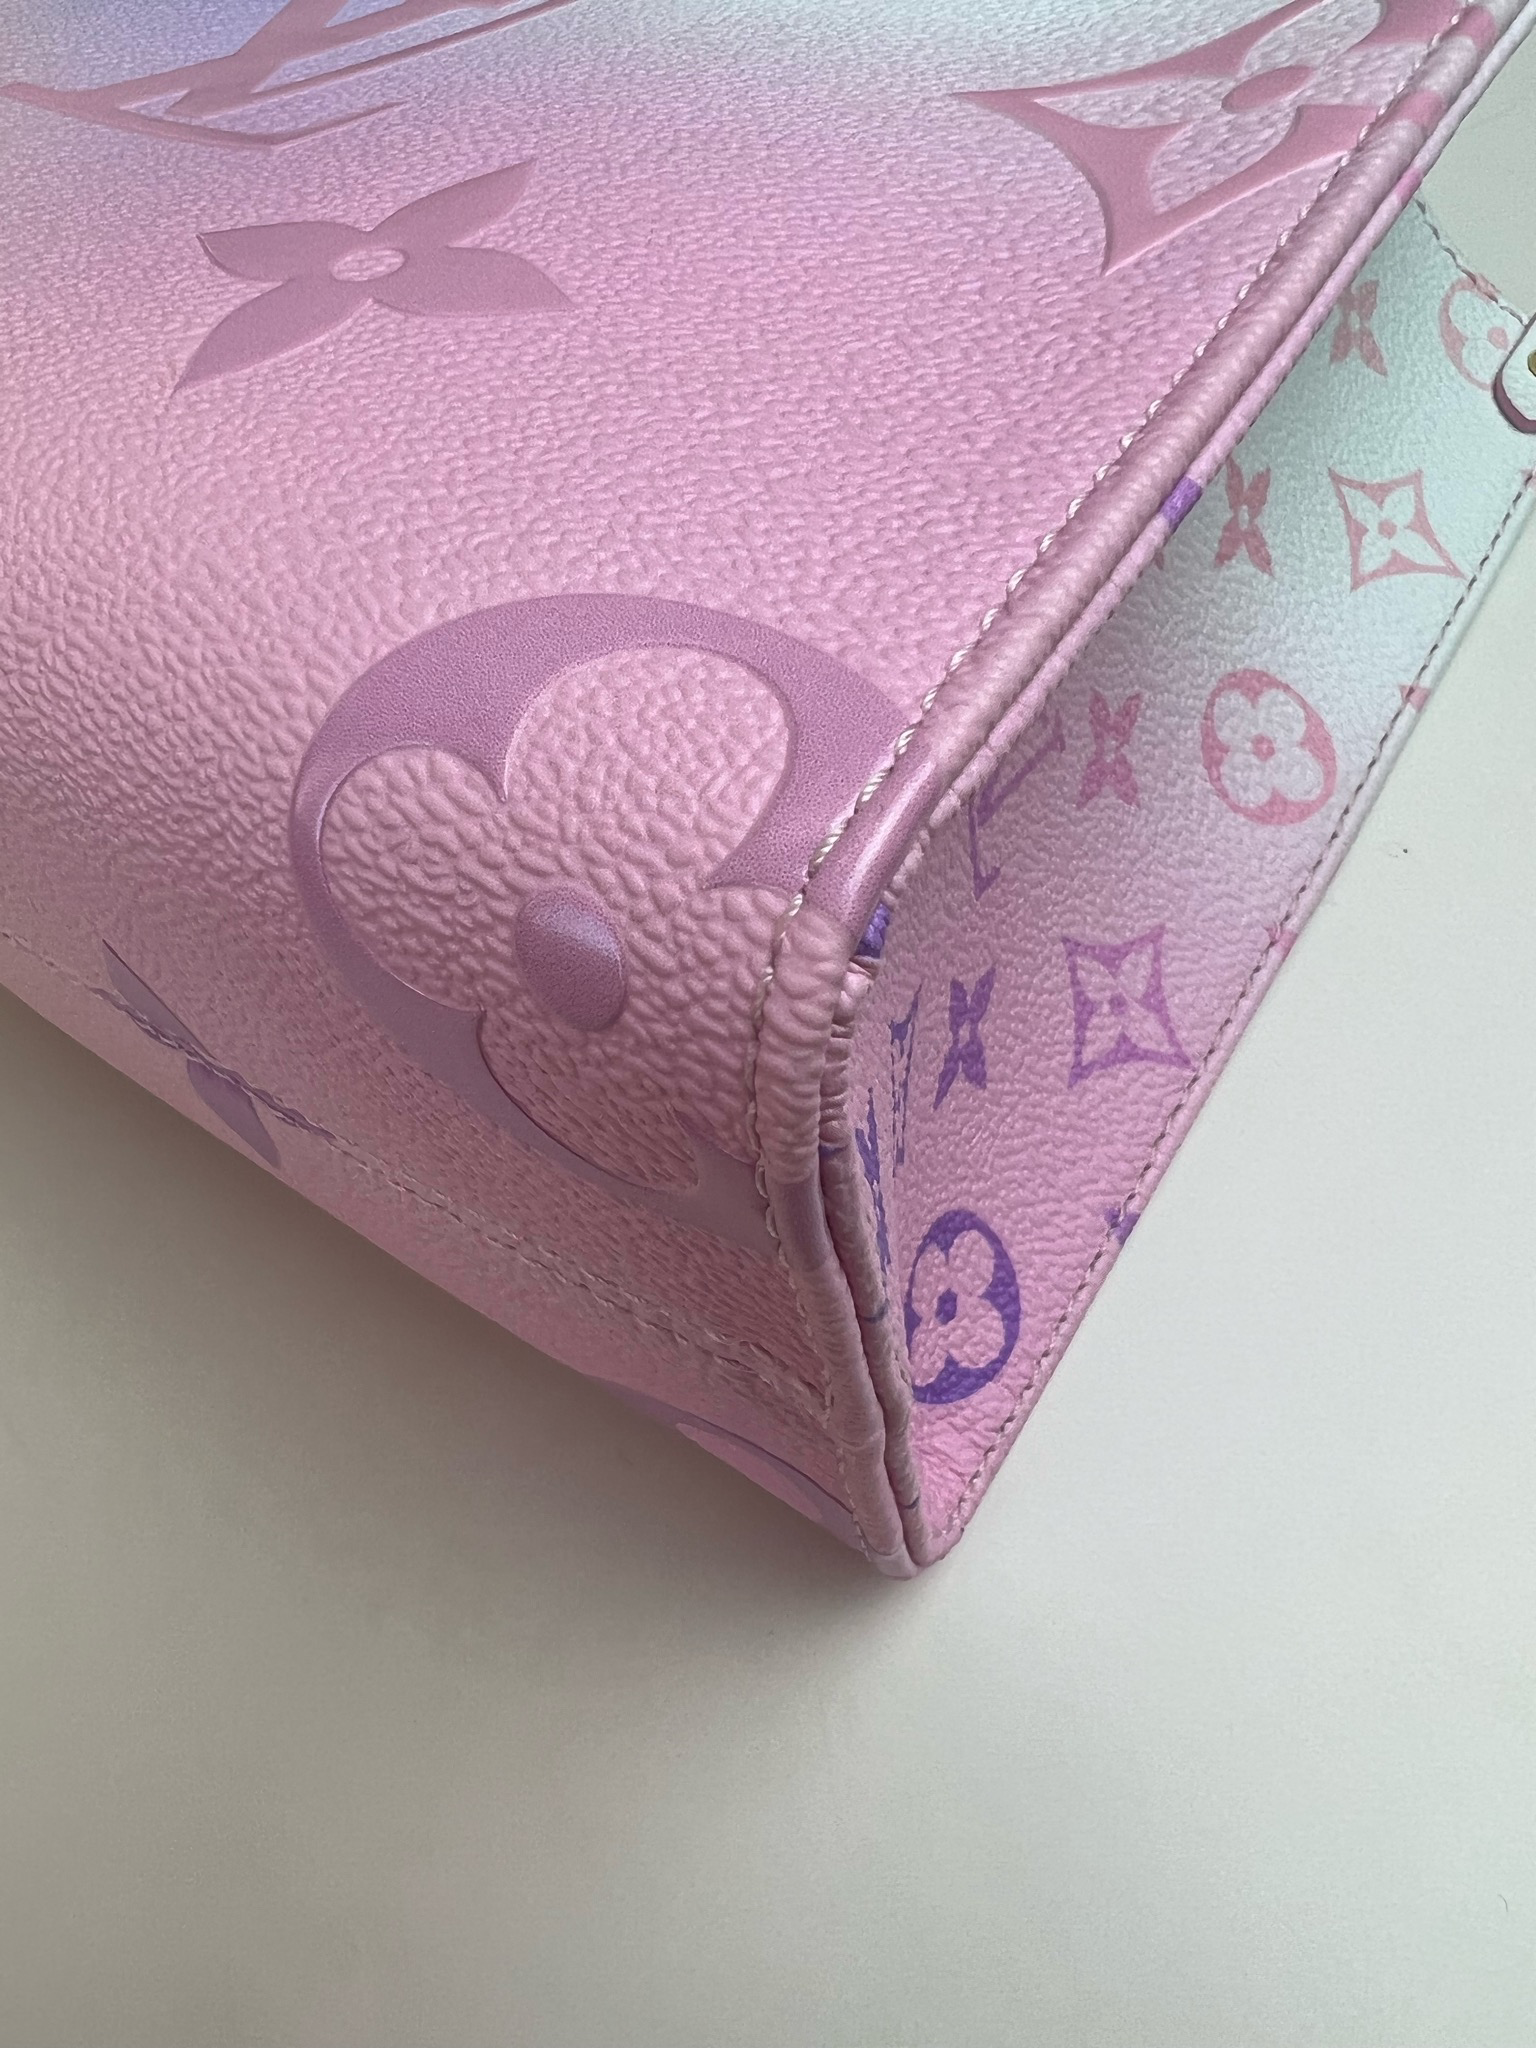 Louis Vuitton OnTheGo PM, Sunrise Pastel, Preowned in Box WA001